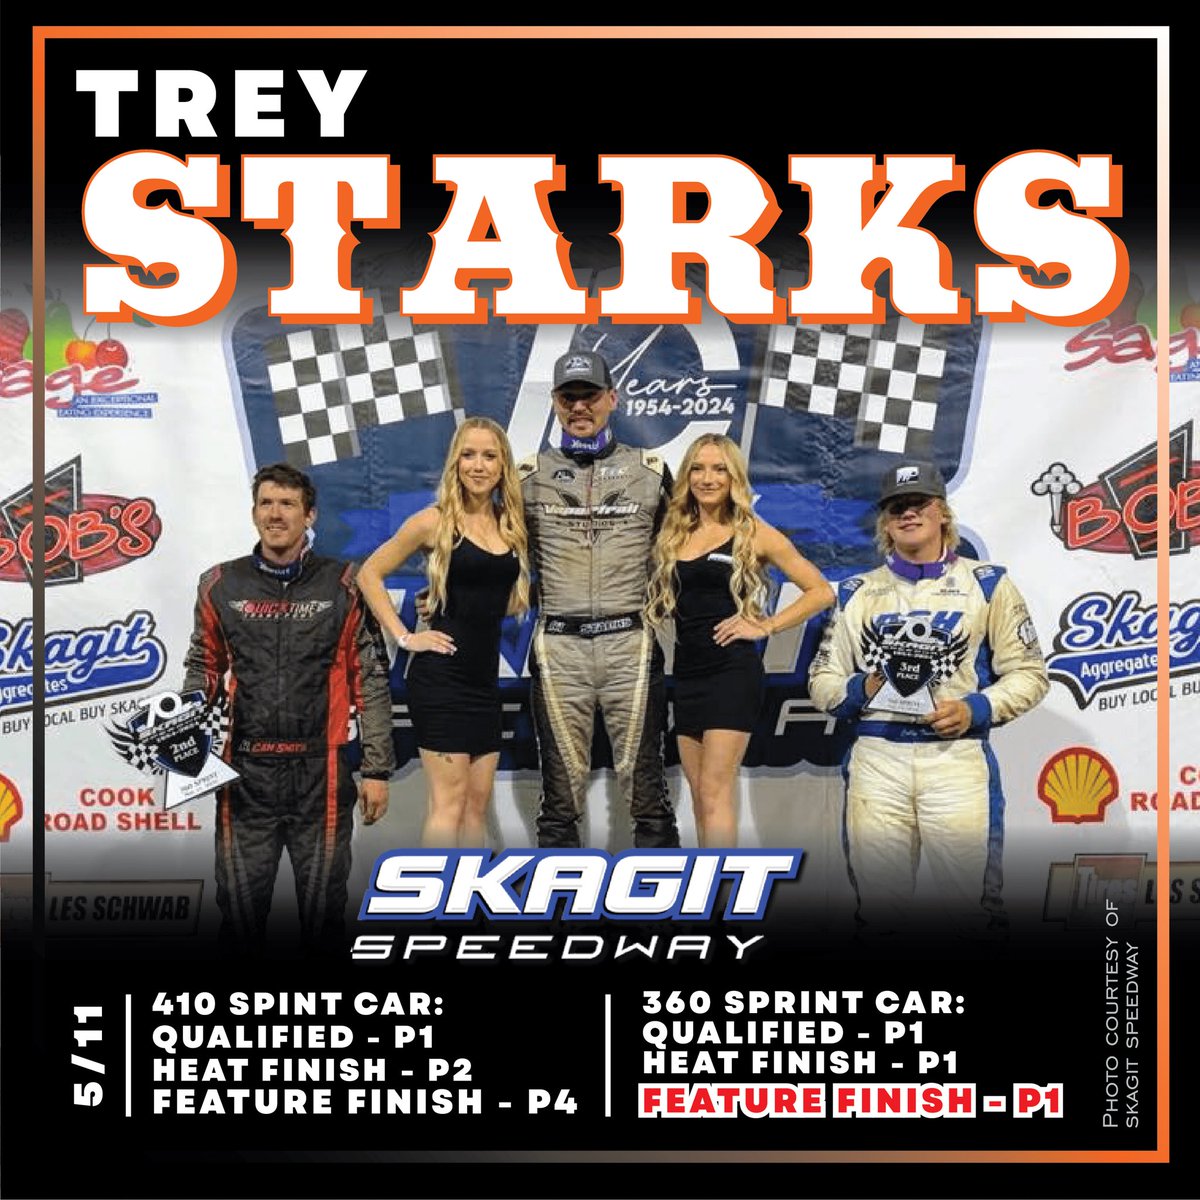 A third win in a row to open the year gave @Starks55Trey his best start to a season in his career! #TeamILP